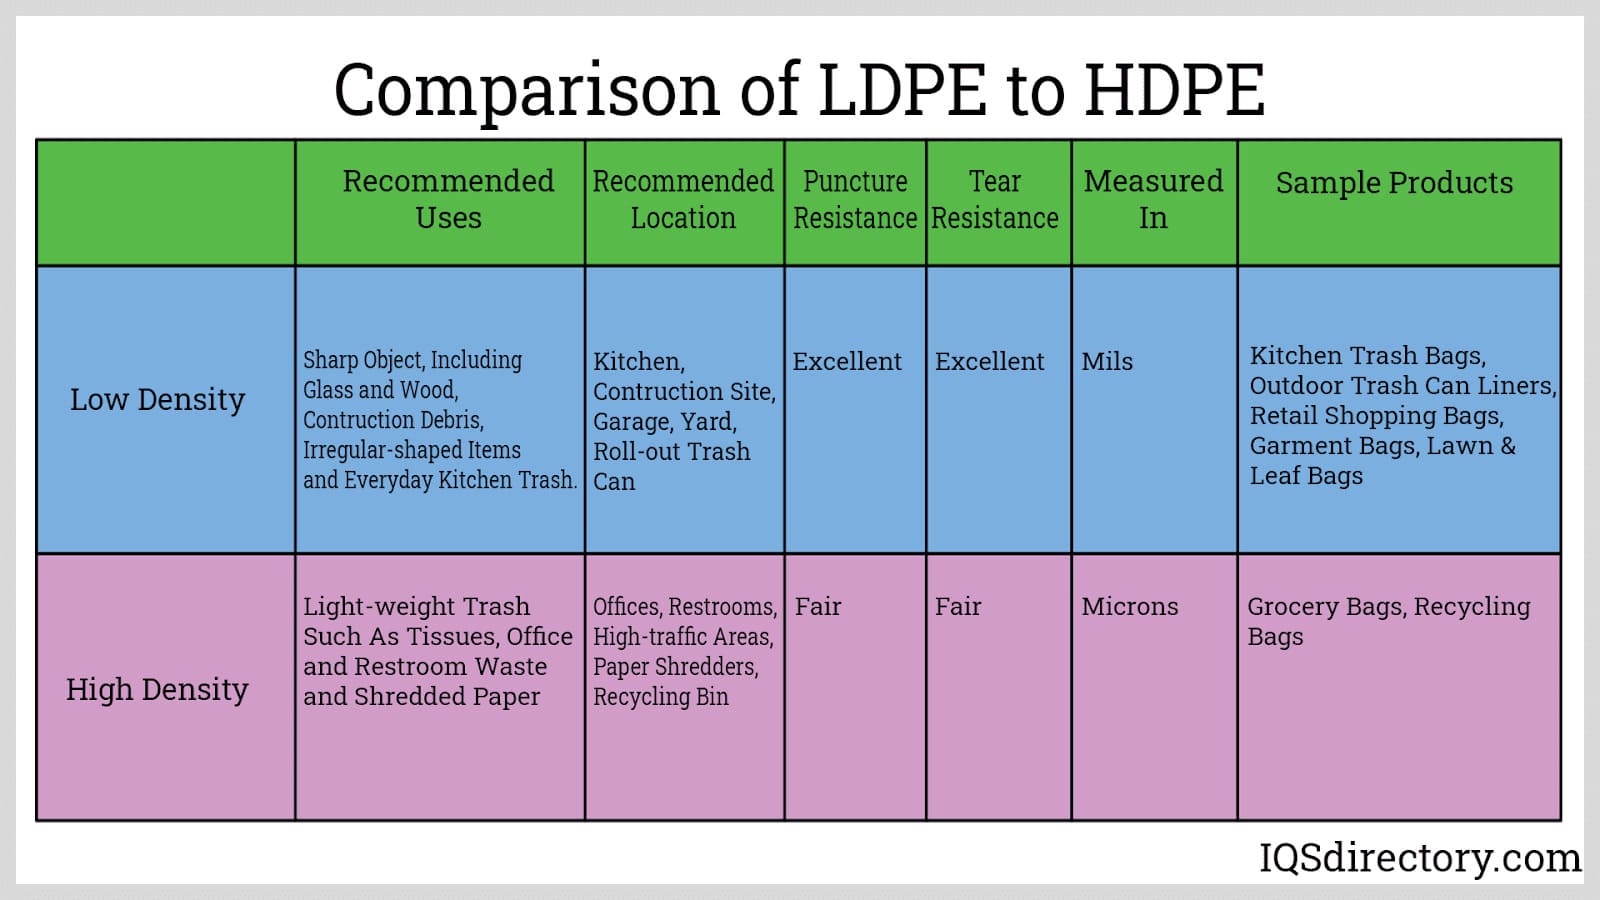 Comparison of LDPE to HDPE